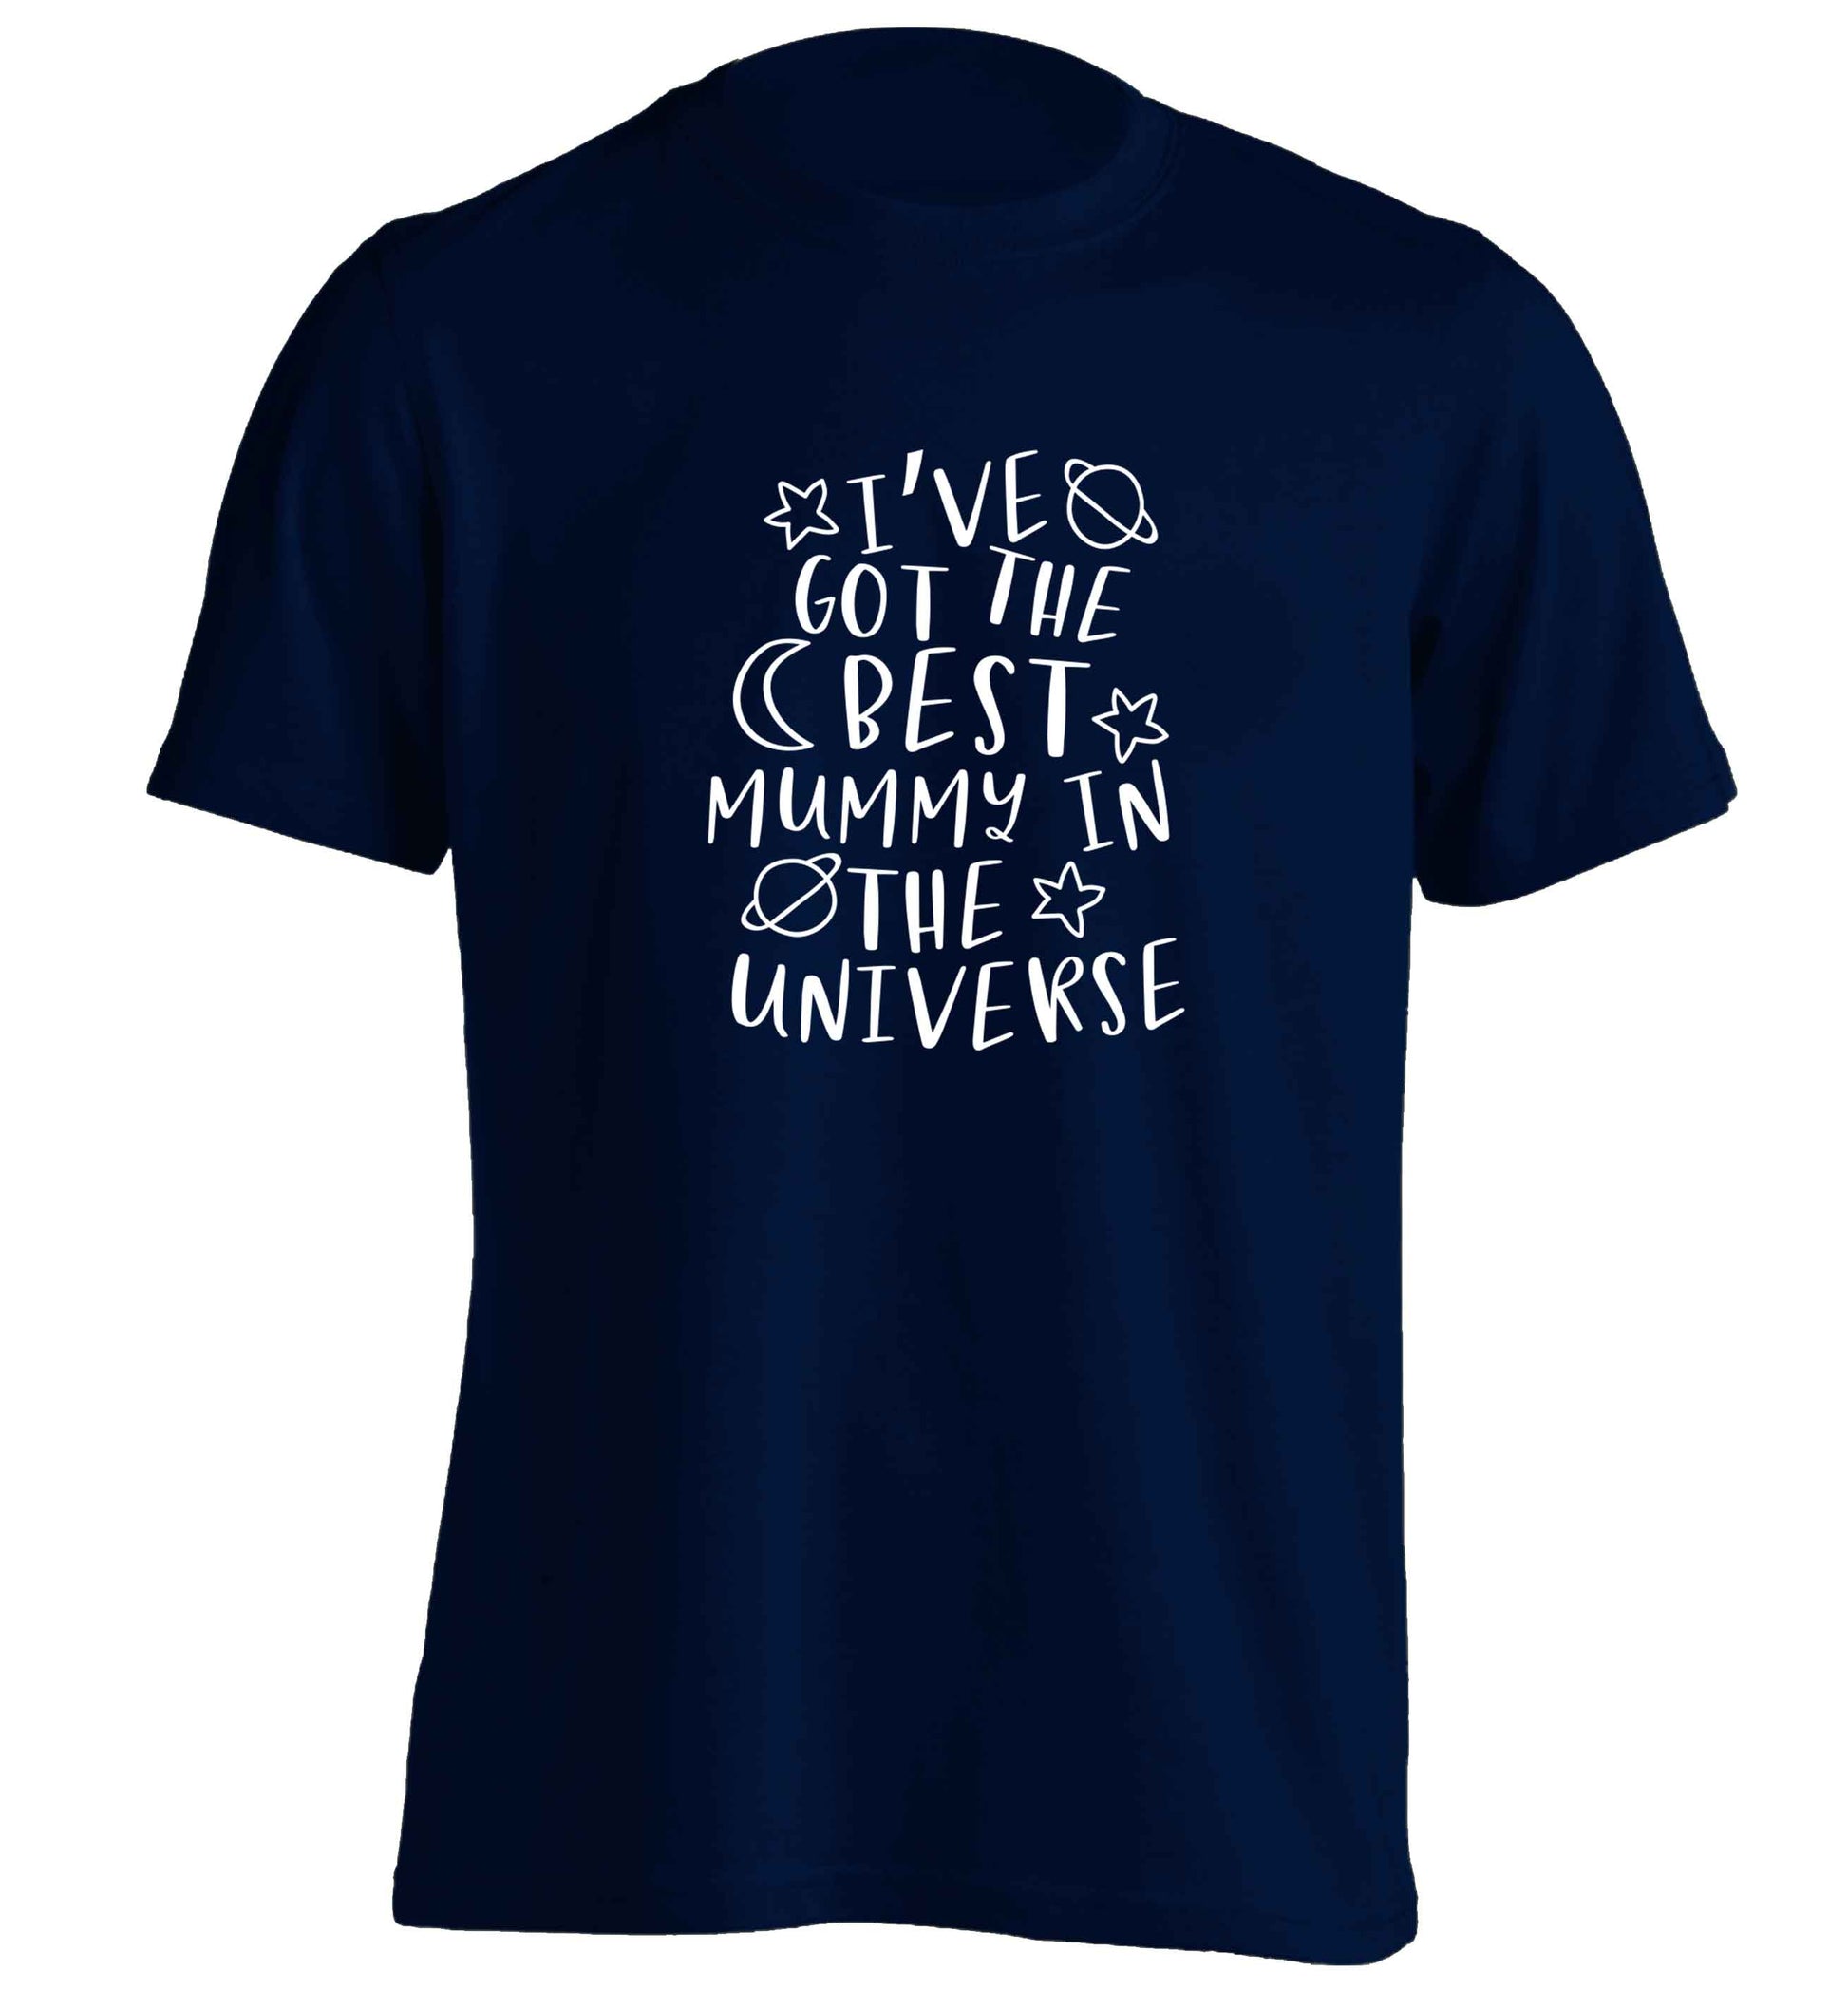 I've got the best mummy in the universe adults unisex navy Tshirt 2XL